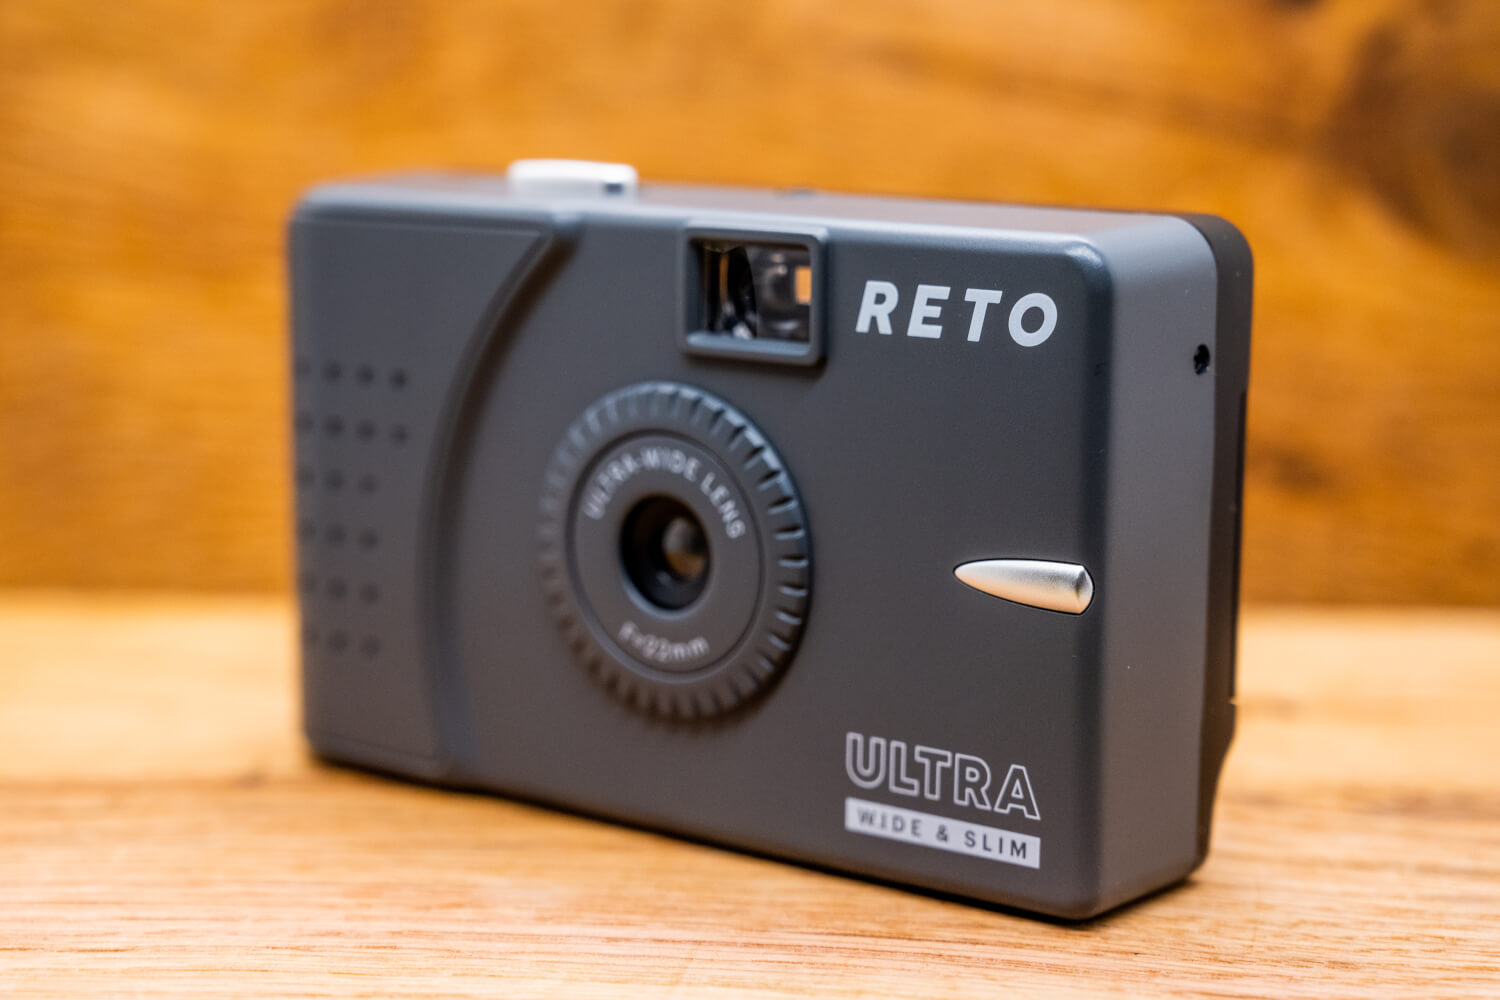 Mini-review: The RETO Ultra Wide & Slim – Experiences and a change in attitude to P&S cameras